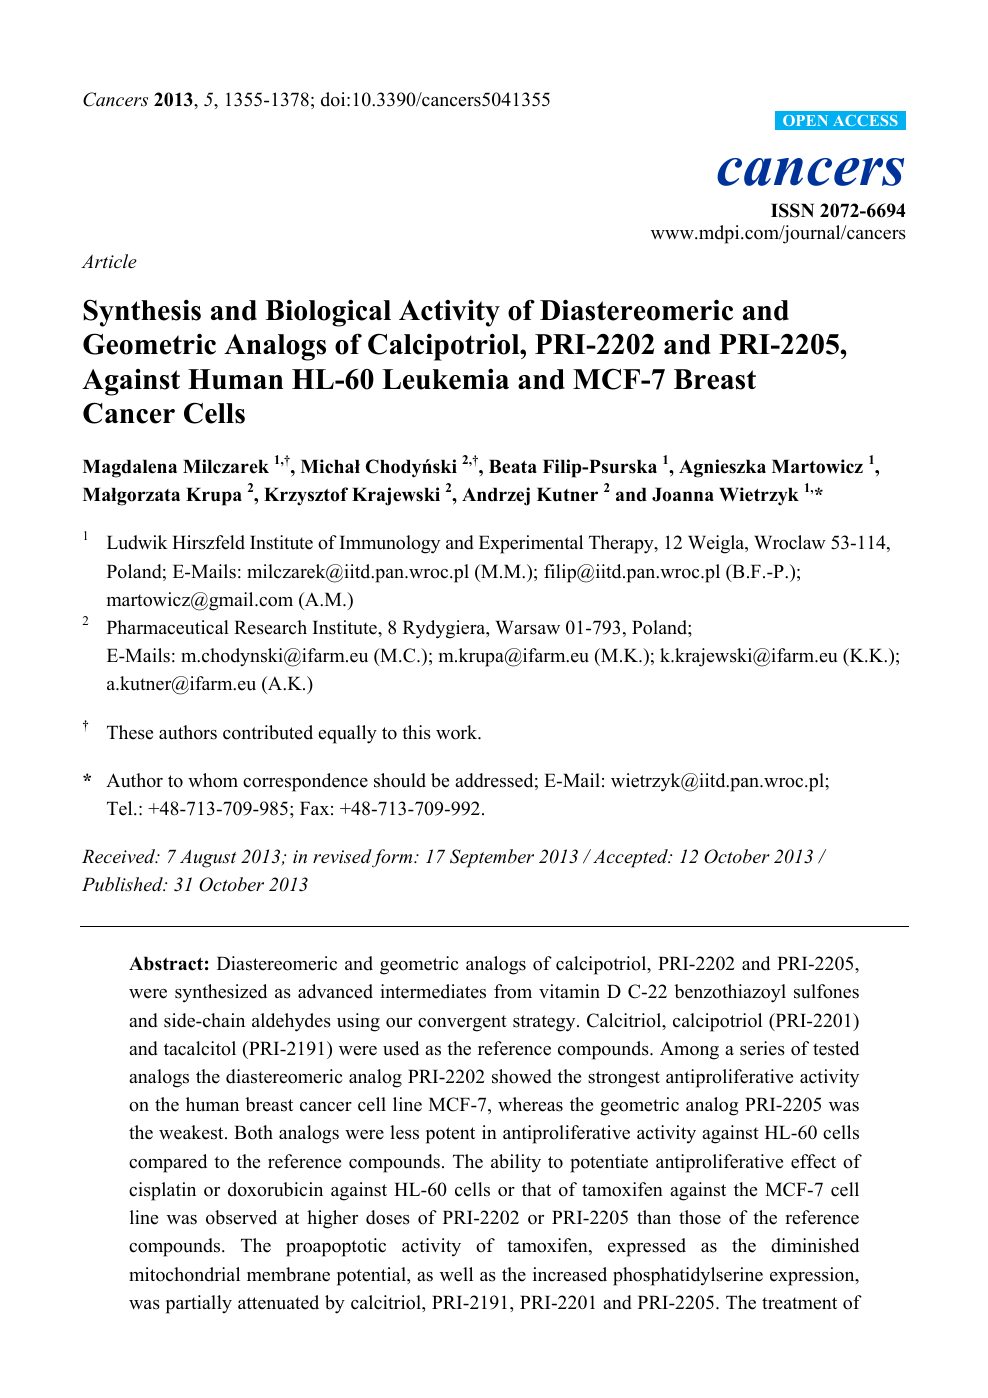 Synthesis And Biological Activity Of Diastereomeric And Geometric Analogs Of Calcipotriol Pri 22 And Pri 25 Against Human Hl 60 Leukemia And Mcf 7 Breast Cancer Cells Topic Of Research Paper In Chemical Sciences Download